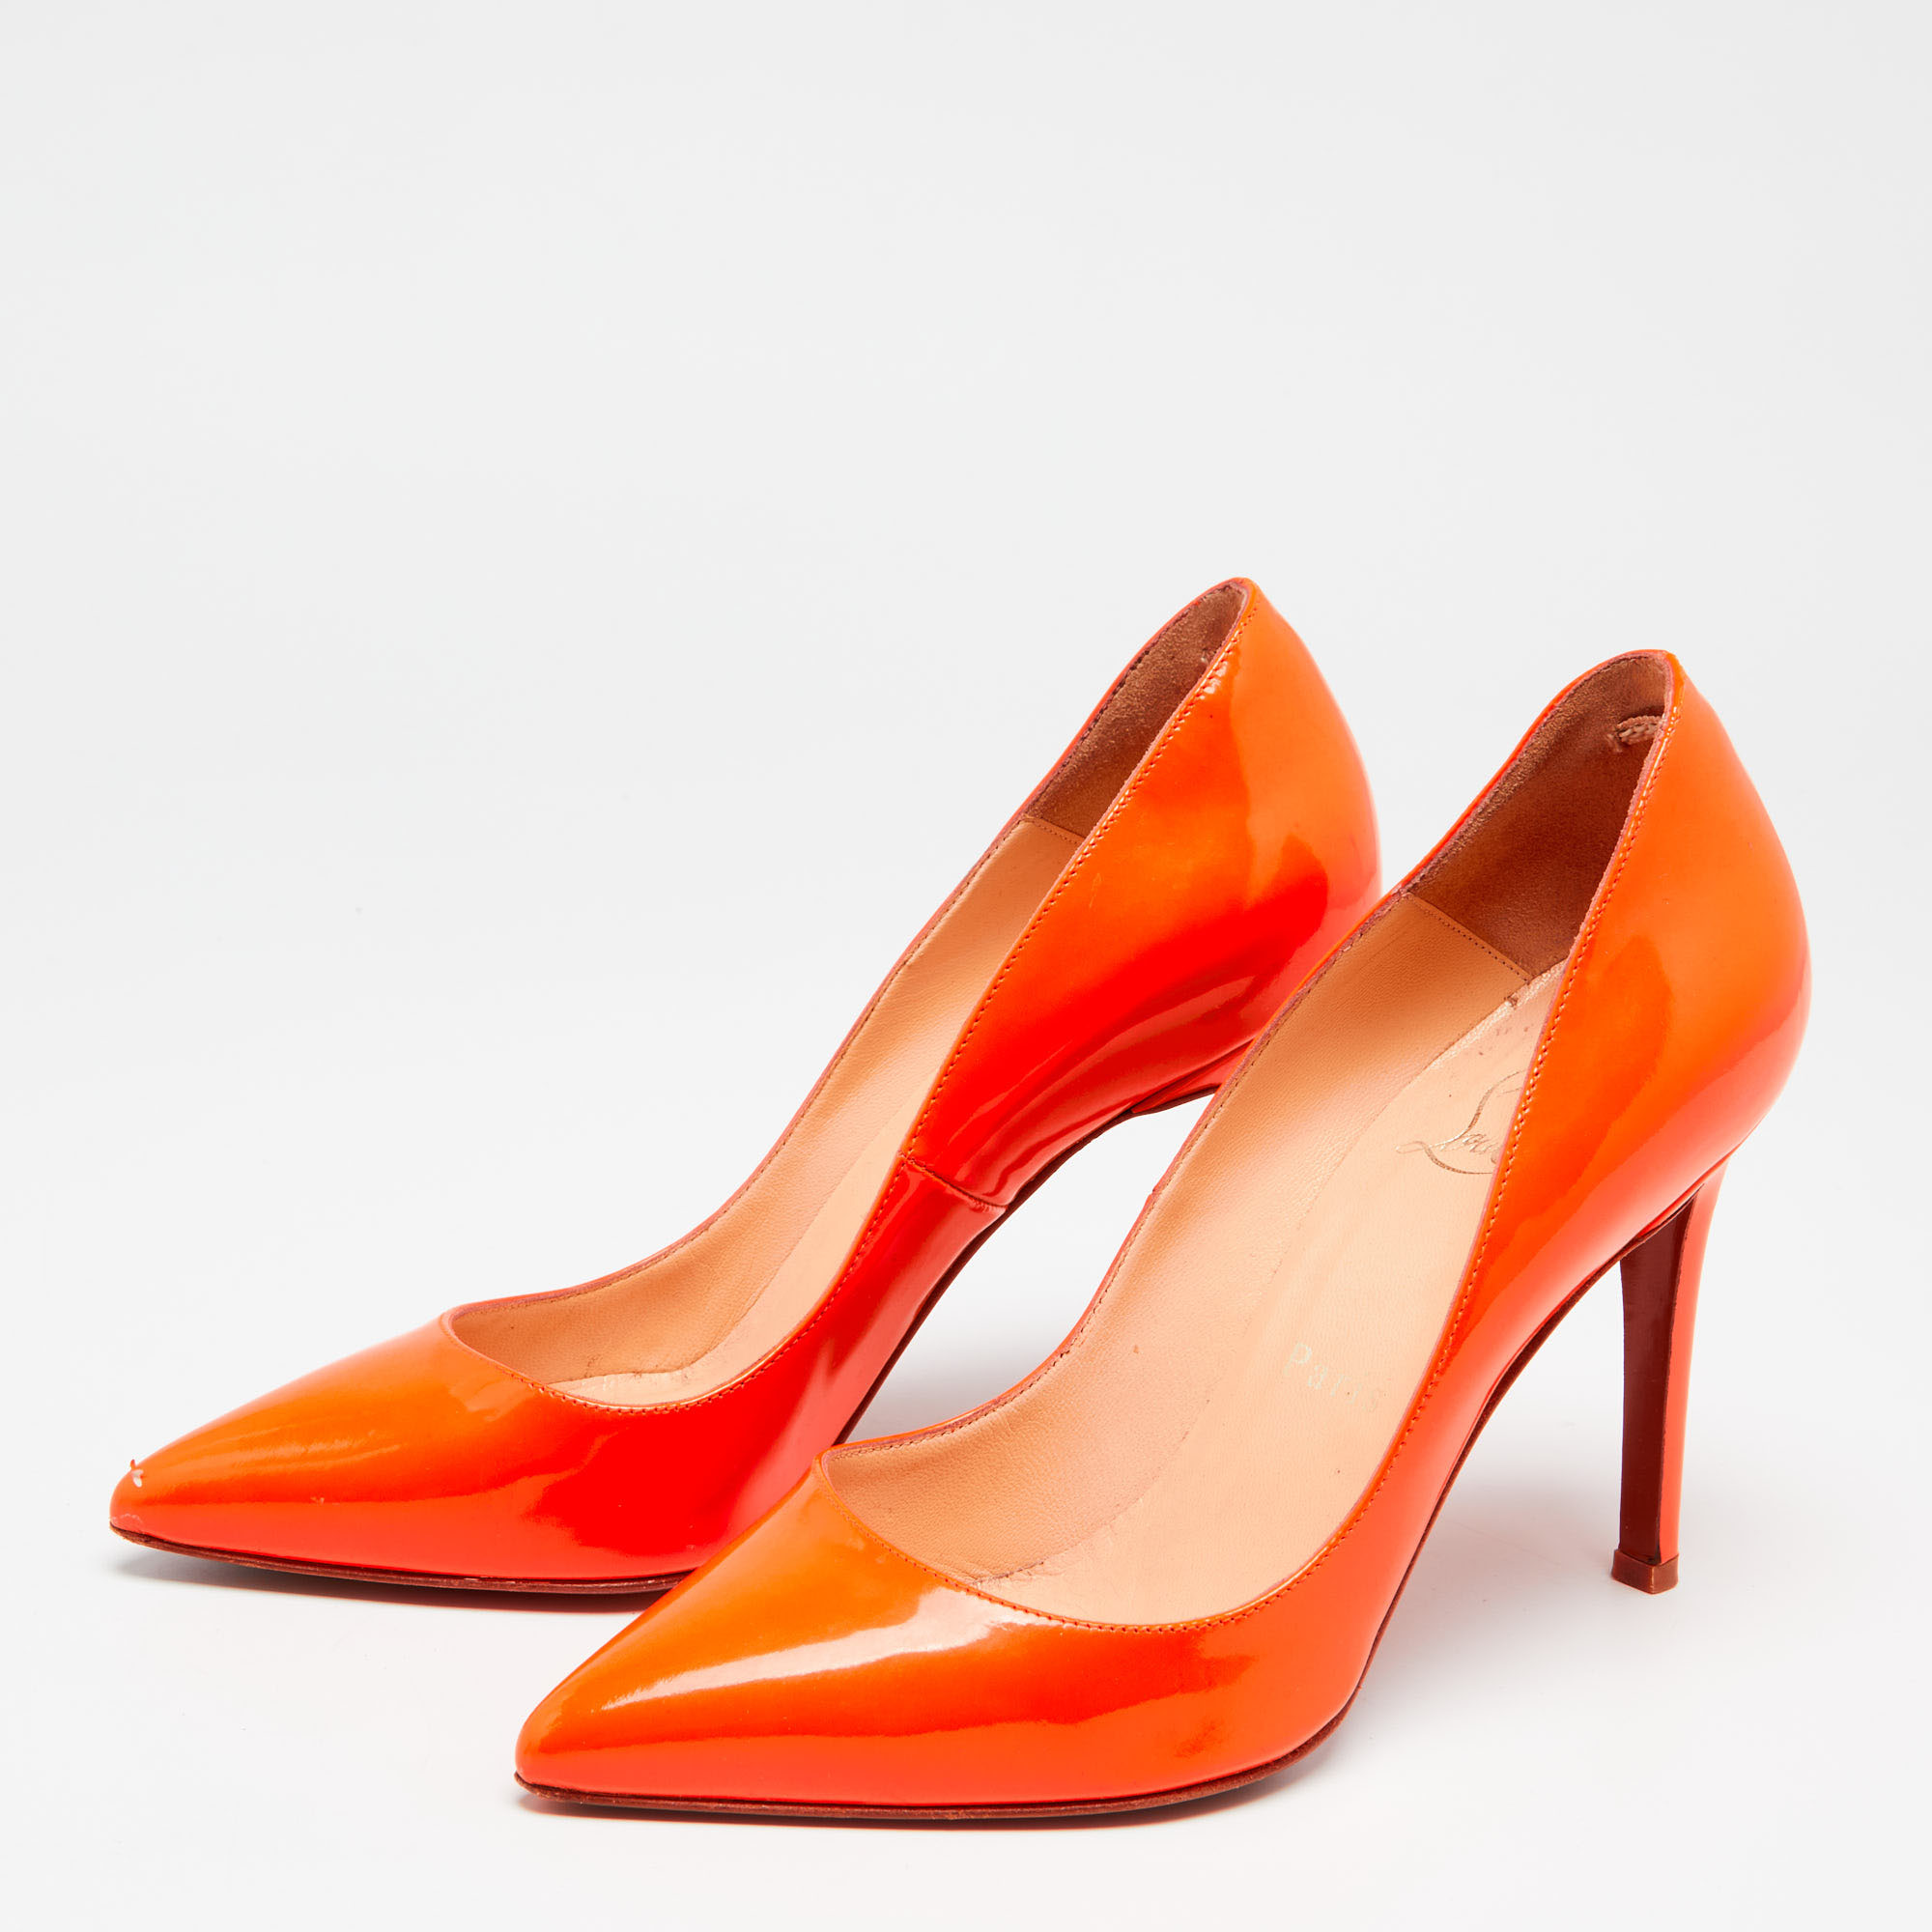 

Christian Louboutin Neon Orange Patent Leather Pigalle Pumps Size